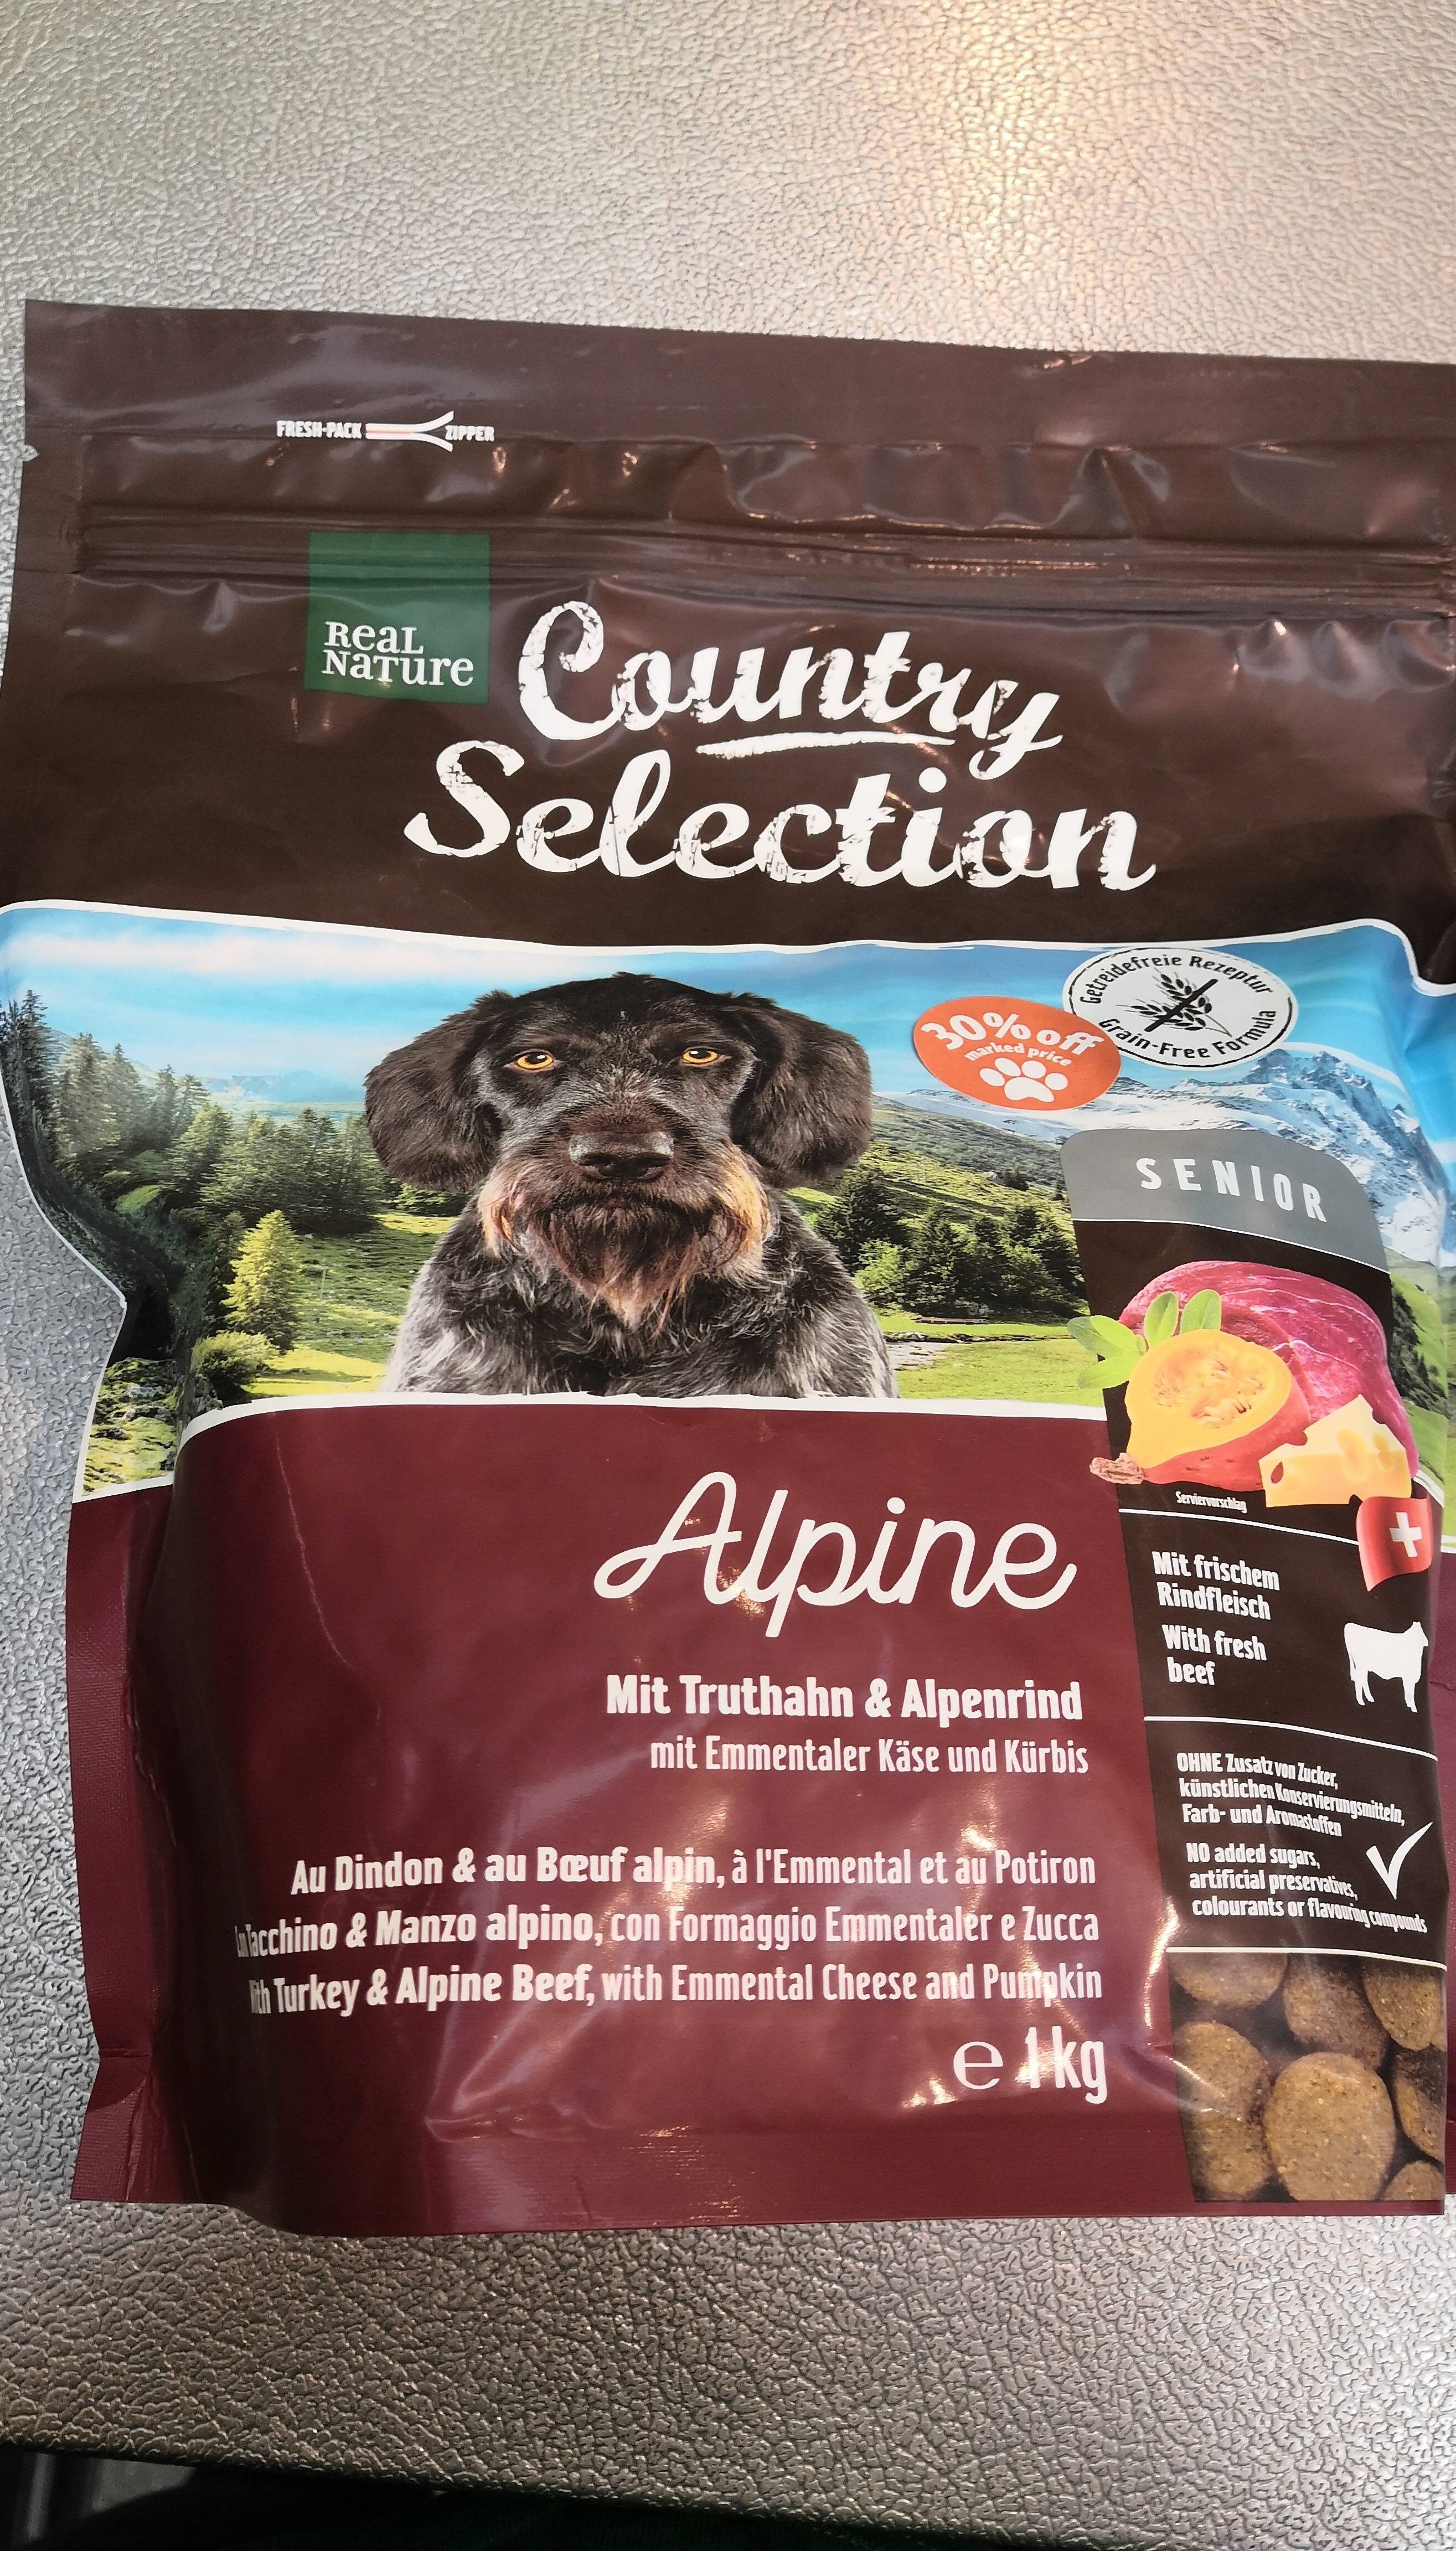 Real nature country select alpine - Product - en